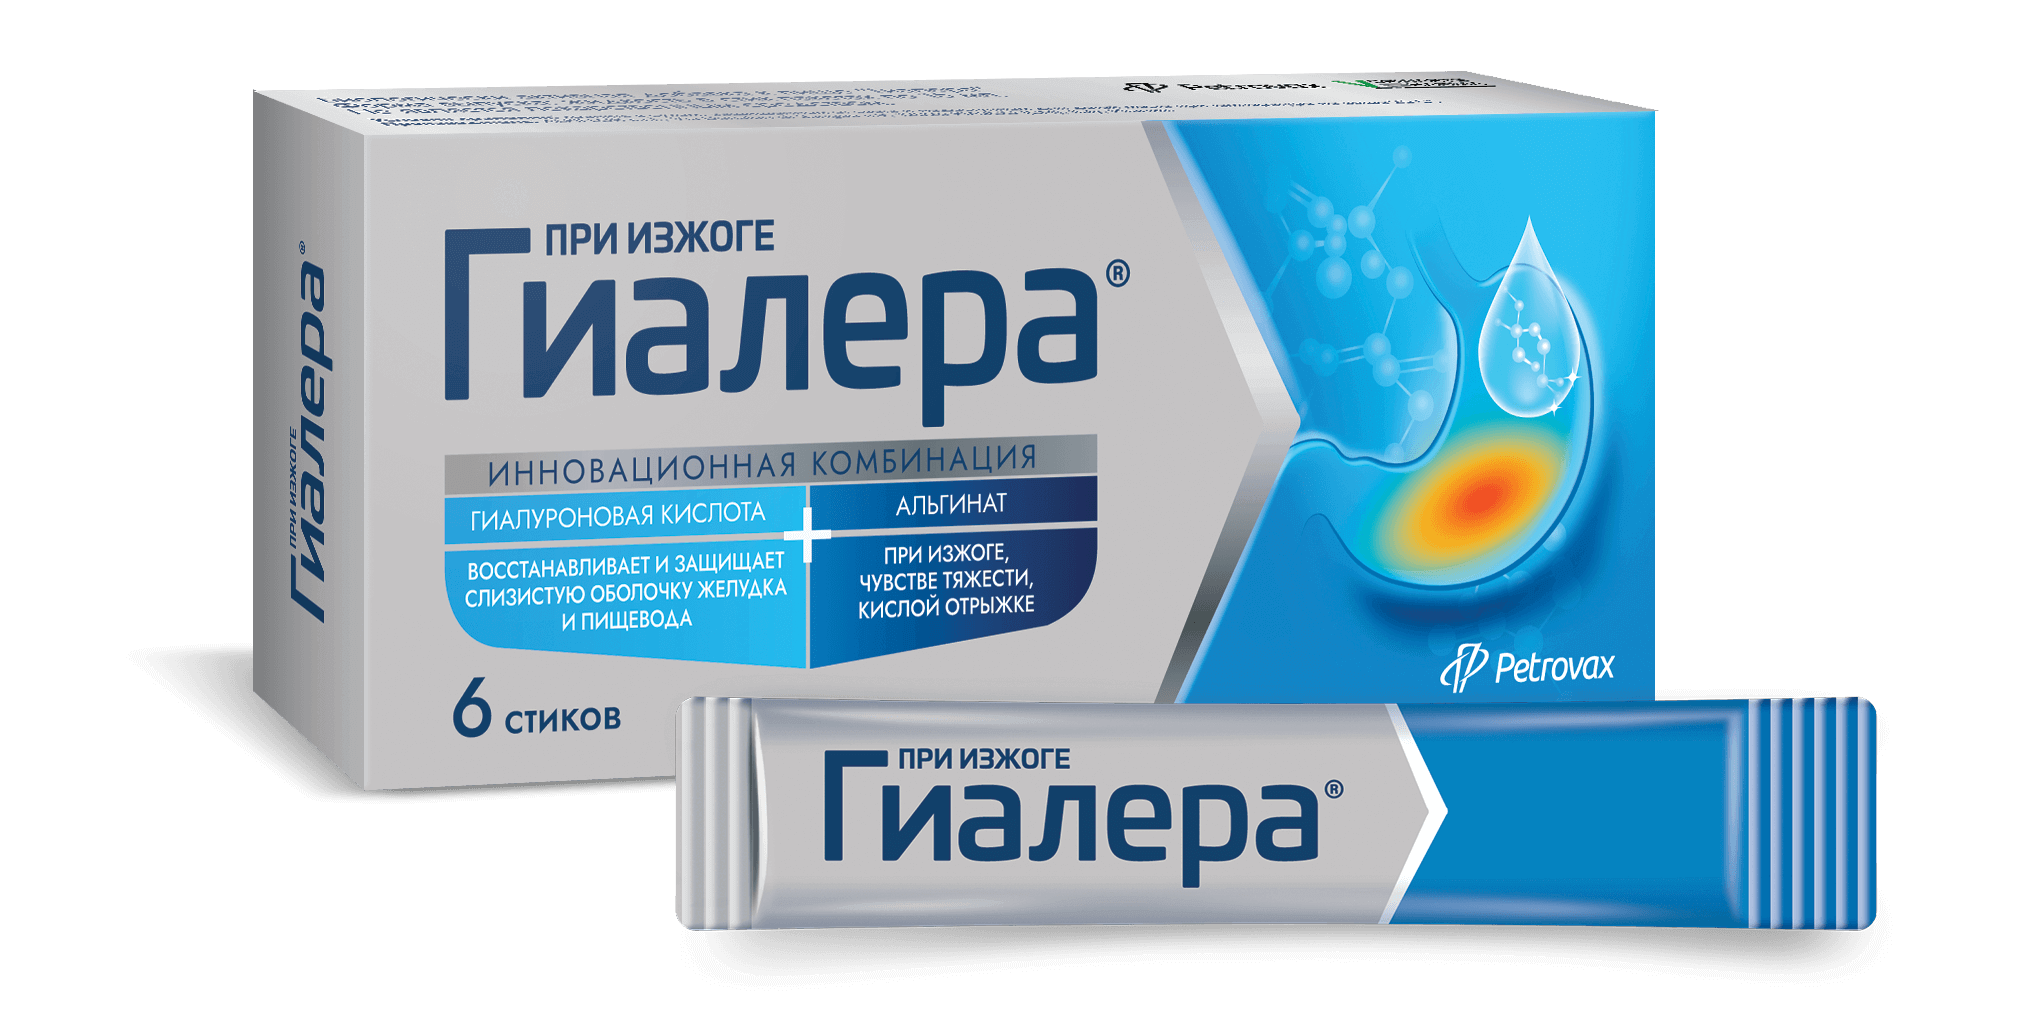 Petrovax presents its new product Gialera®